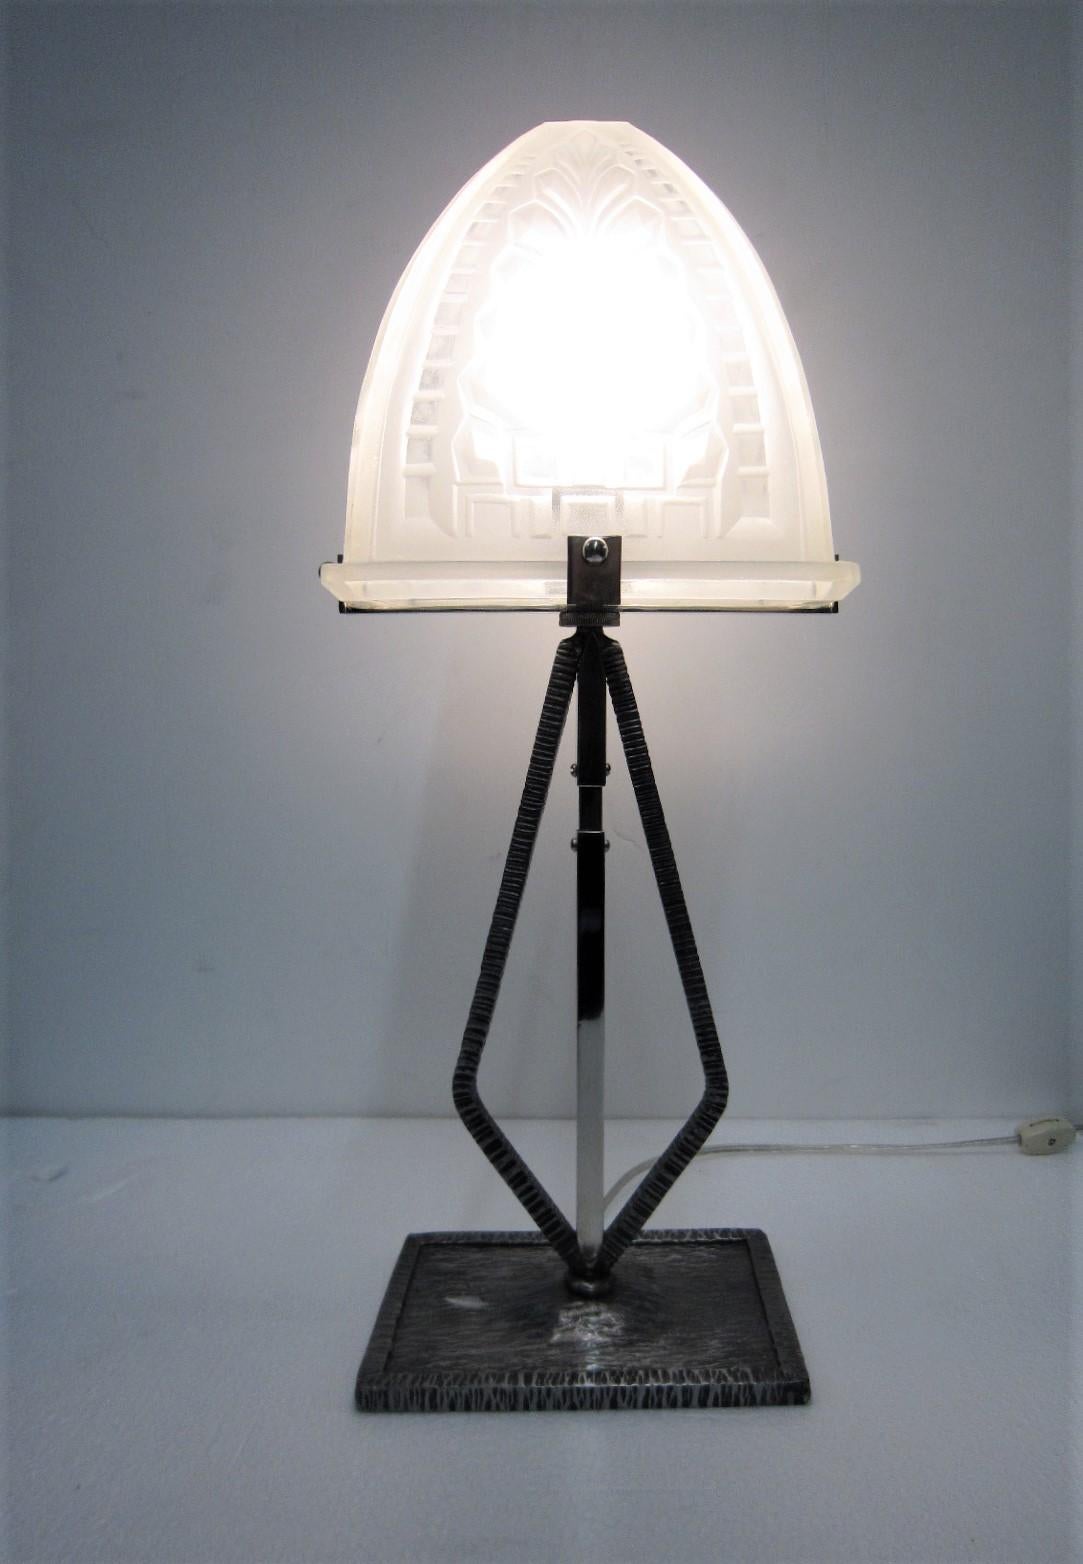 A French Art Deco or Minimalist unusually shaped, narrow table lamp featuring a heavily molded French art glass
trapezoidal shade of stylized fern and geometric design, resting on a nickeled finish hand-hammered iron base with nickeled bronze trim.